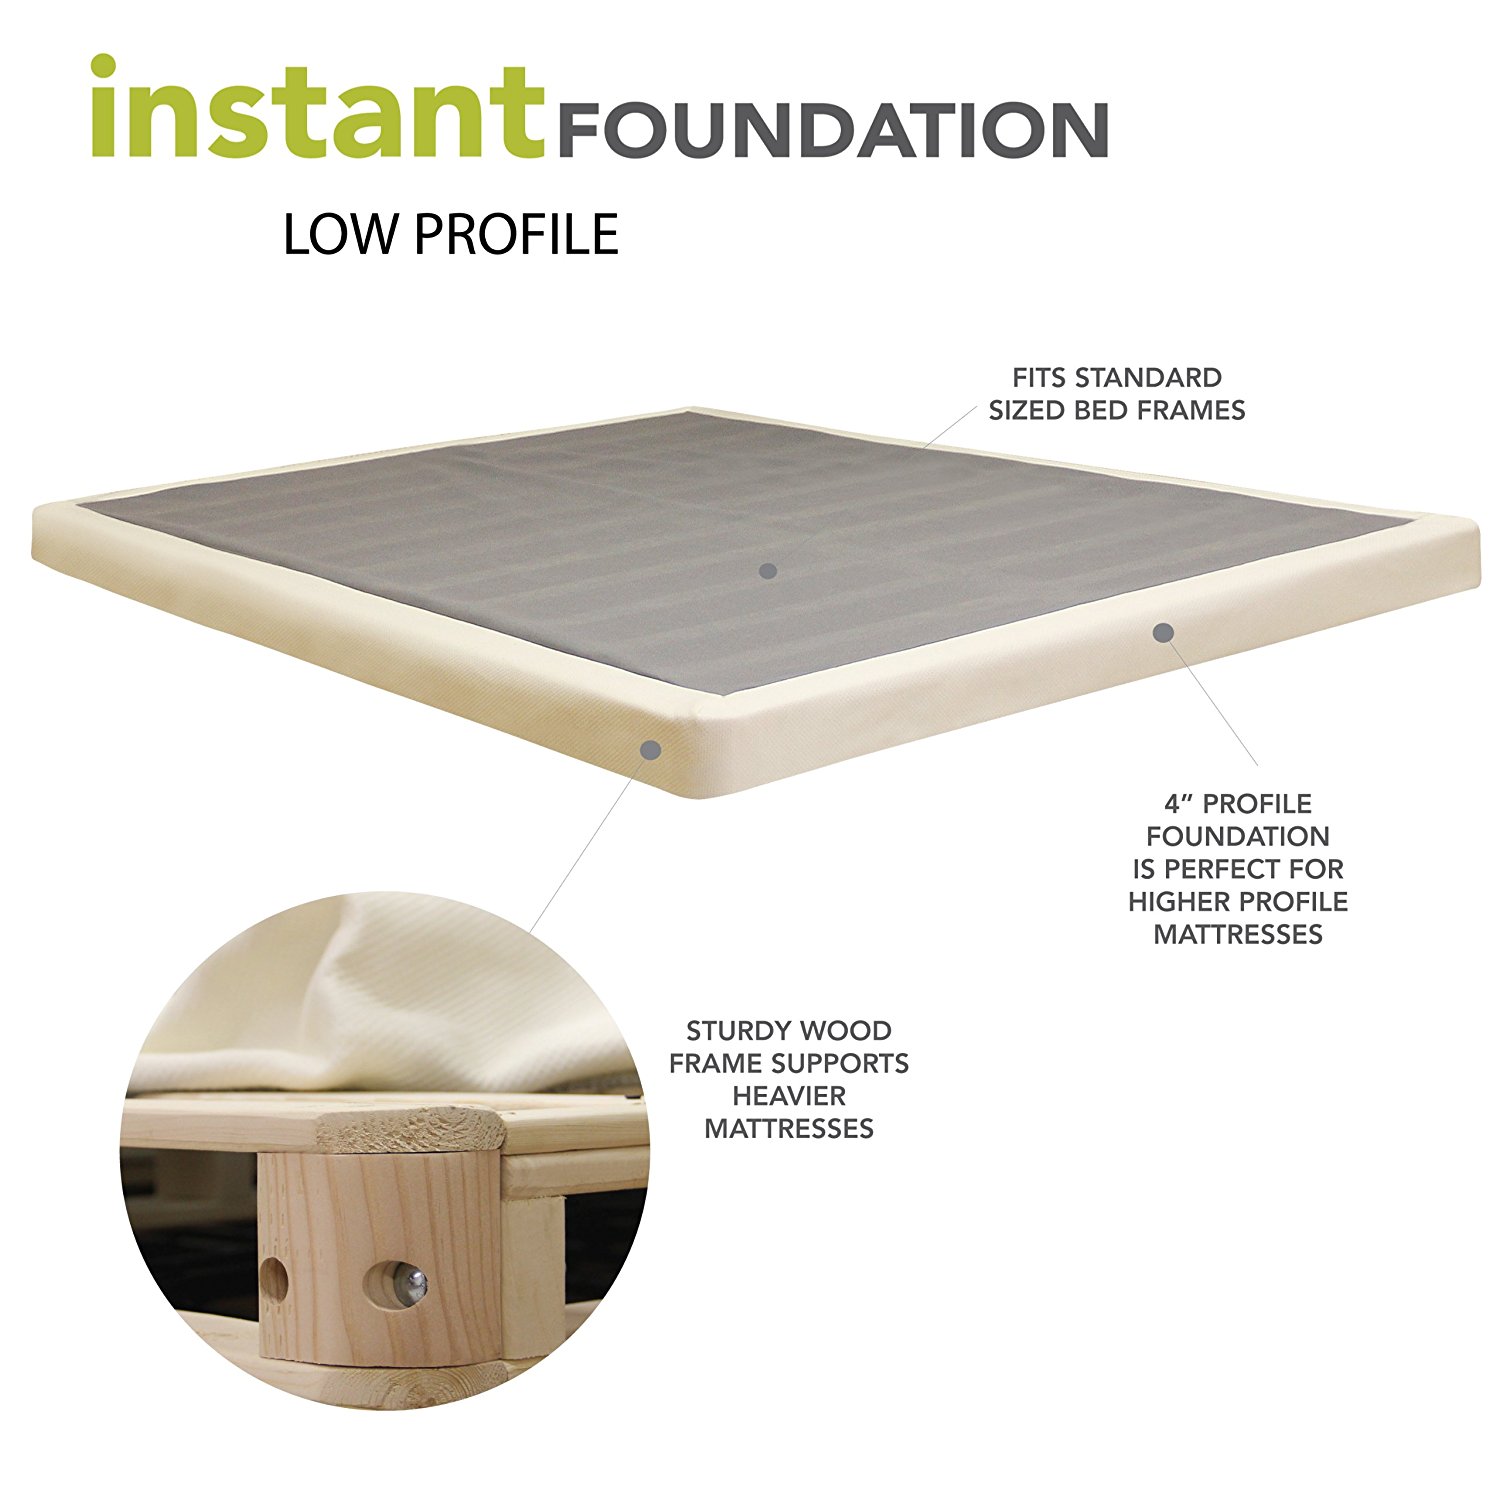 Classic Brands 4 Inch Instant Foundation Low Profile Foundation or Box Spring Replacement, Cal King